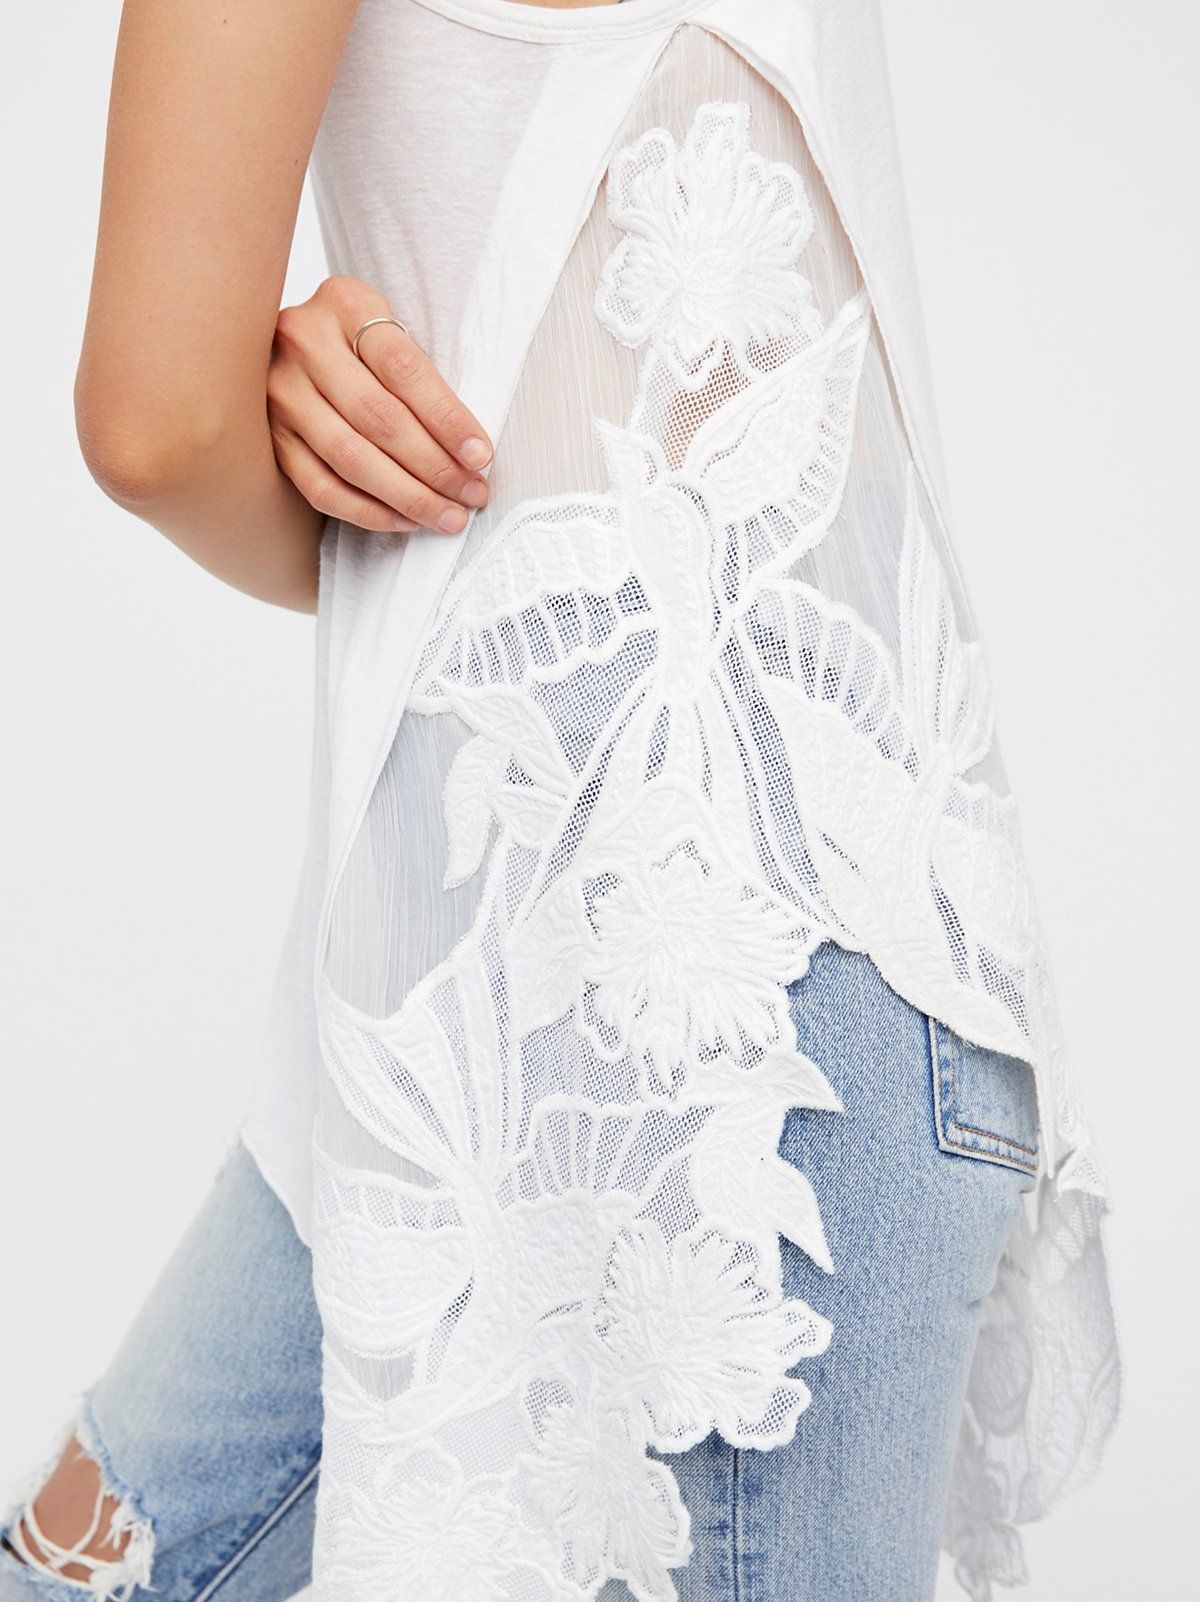 Flock Together Tunic | Free People